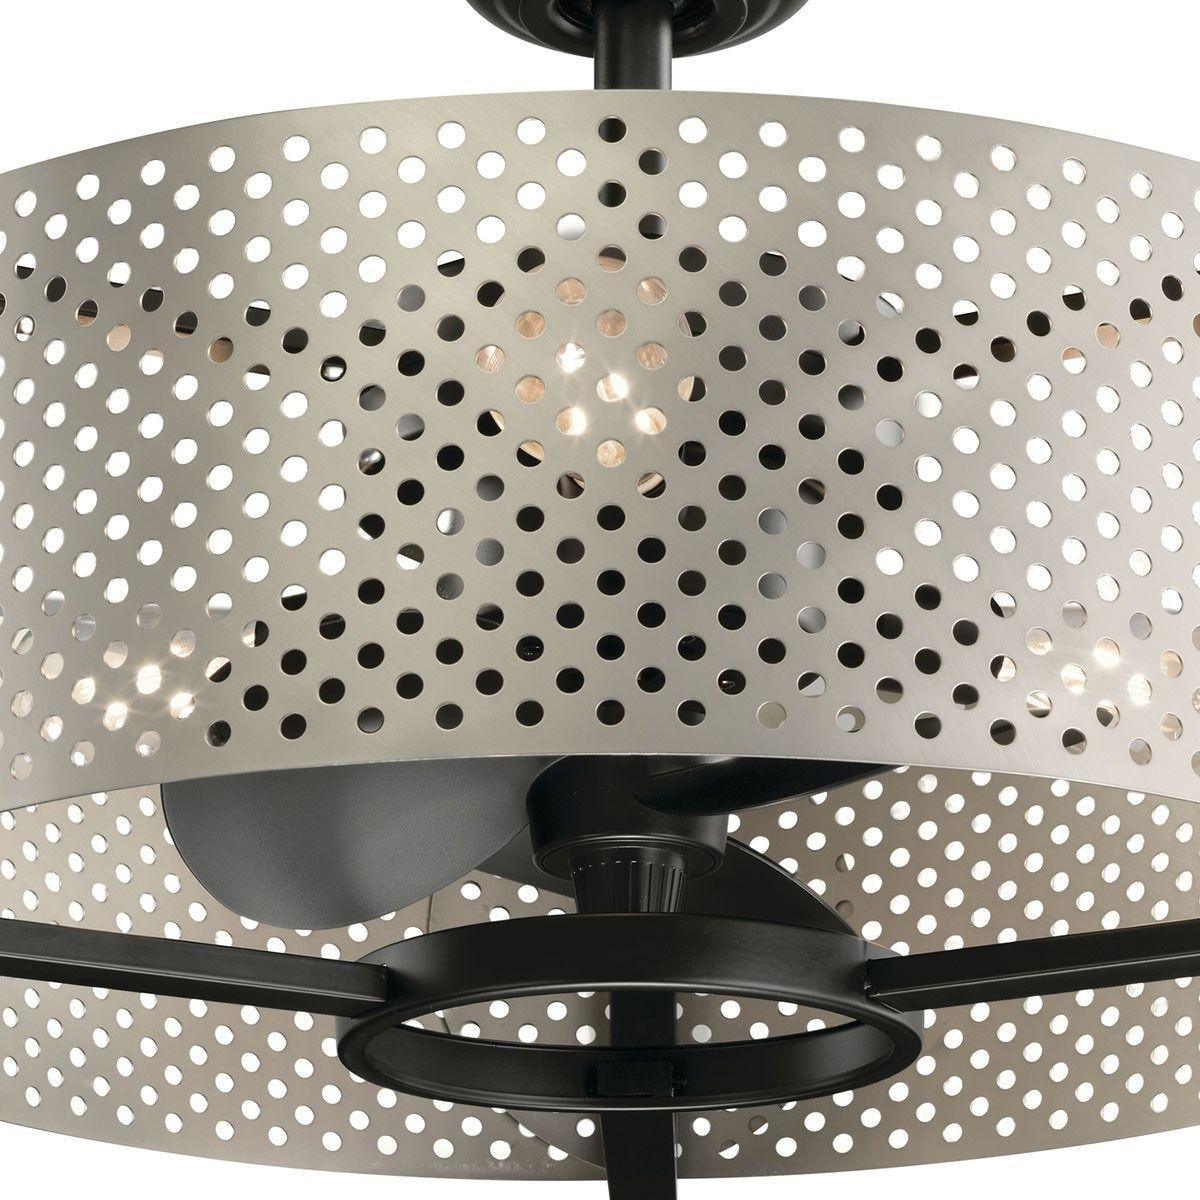 Eyrie 23 Inch Modern Chandelier Ceiling Fan With Light, Wall Control Included